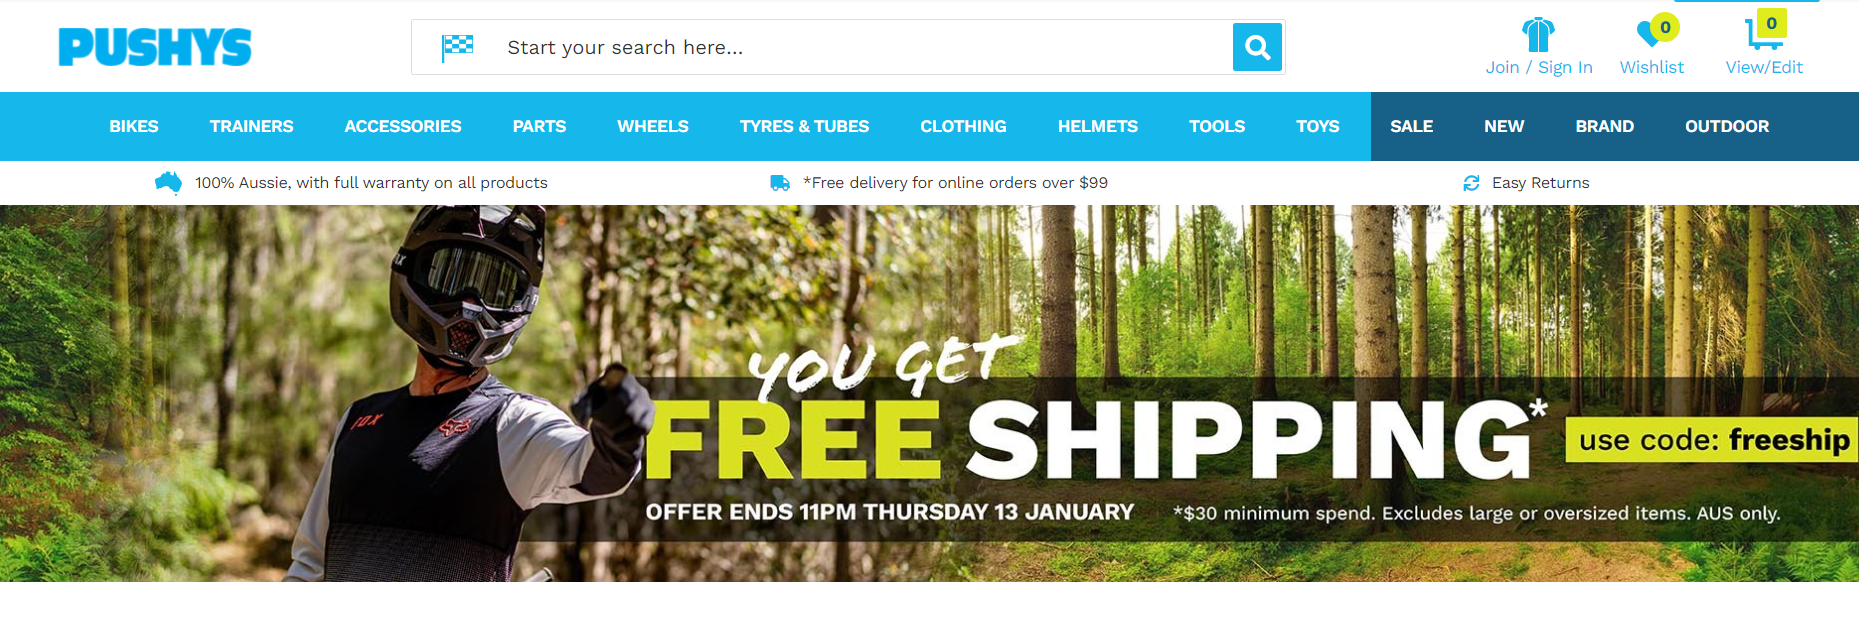 Free shipping on orders over $30 or more with Pushys promo code